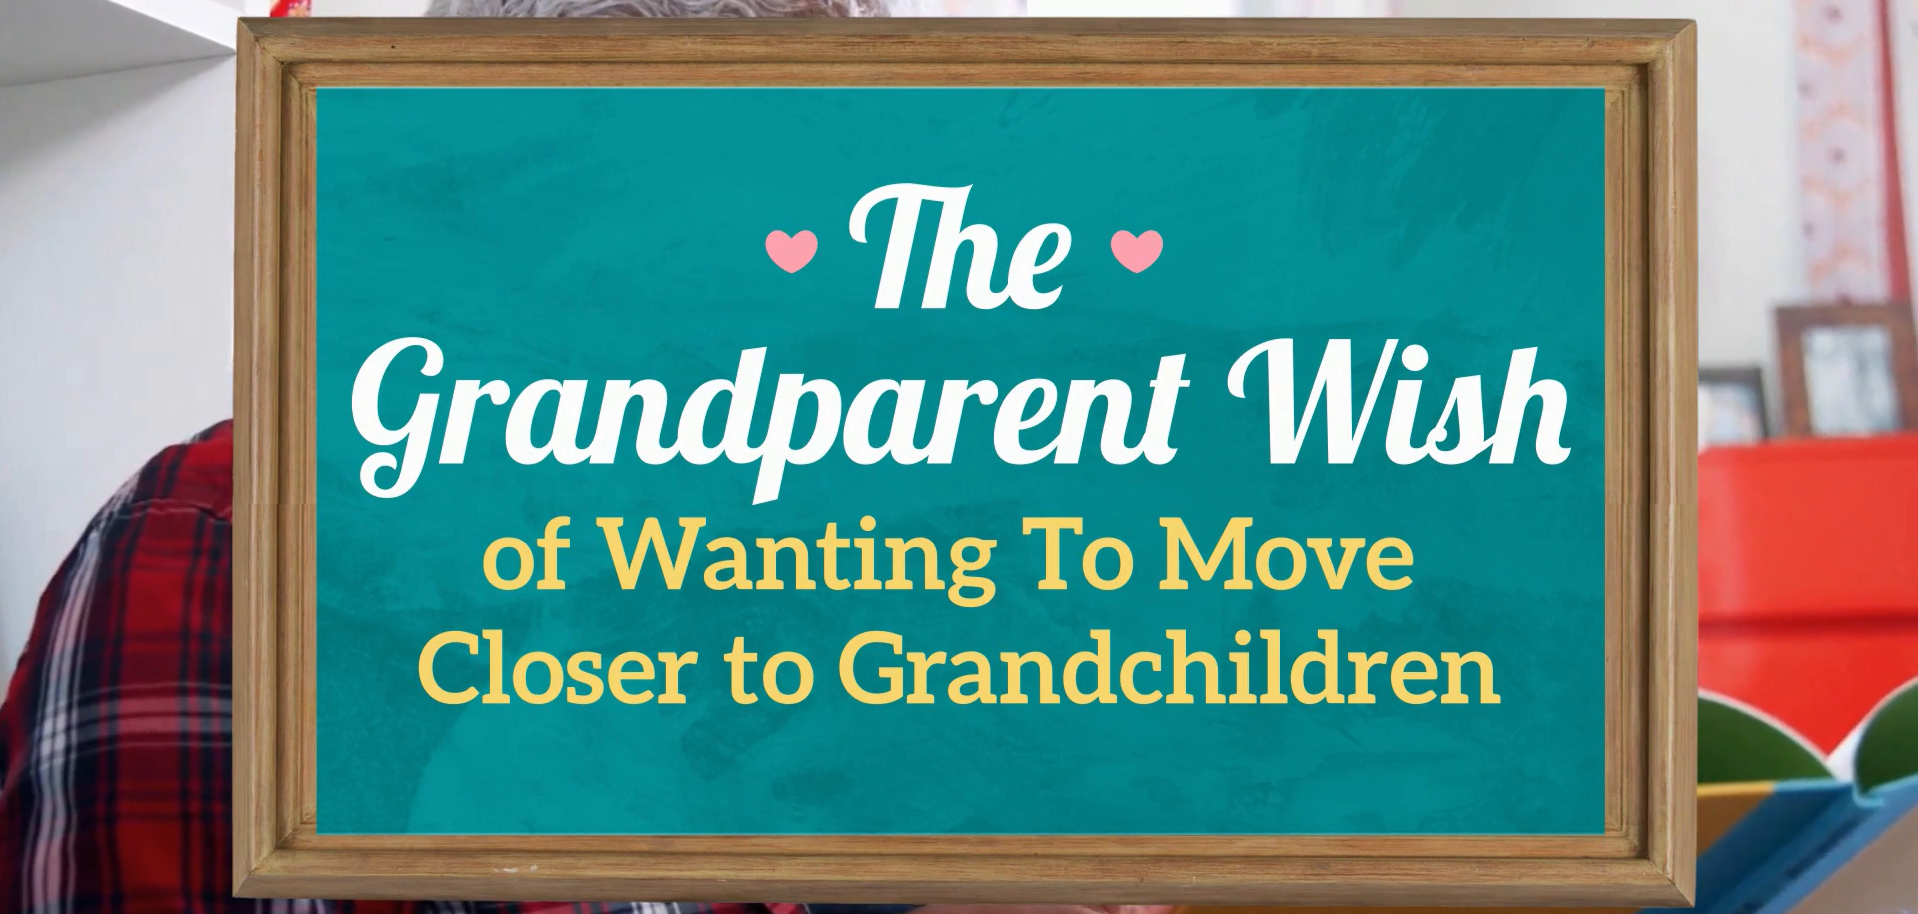 Grandparent Wish of Wanting to Move Closer to Grandchildren for Jean-Luc Andriot blog 102723